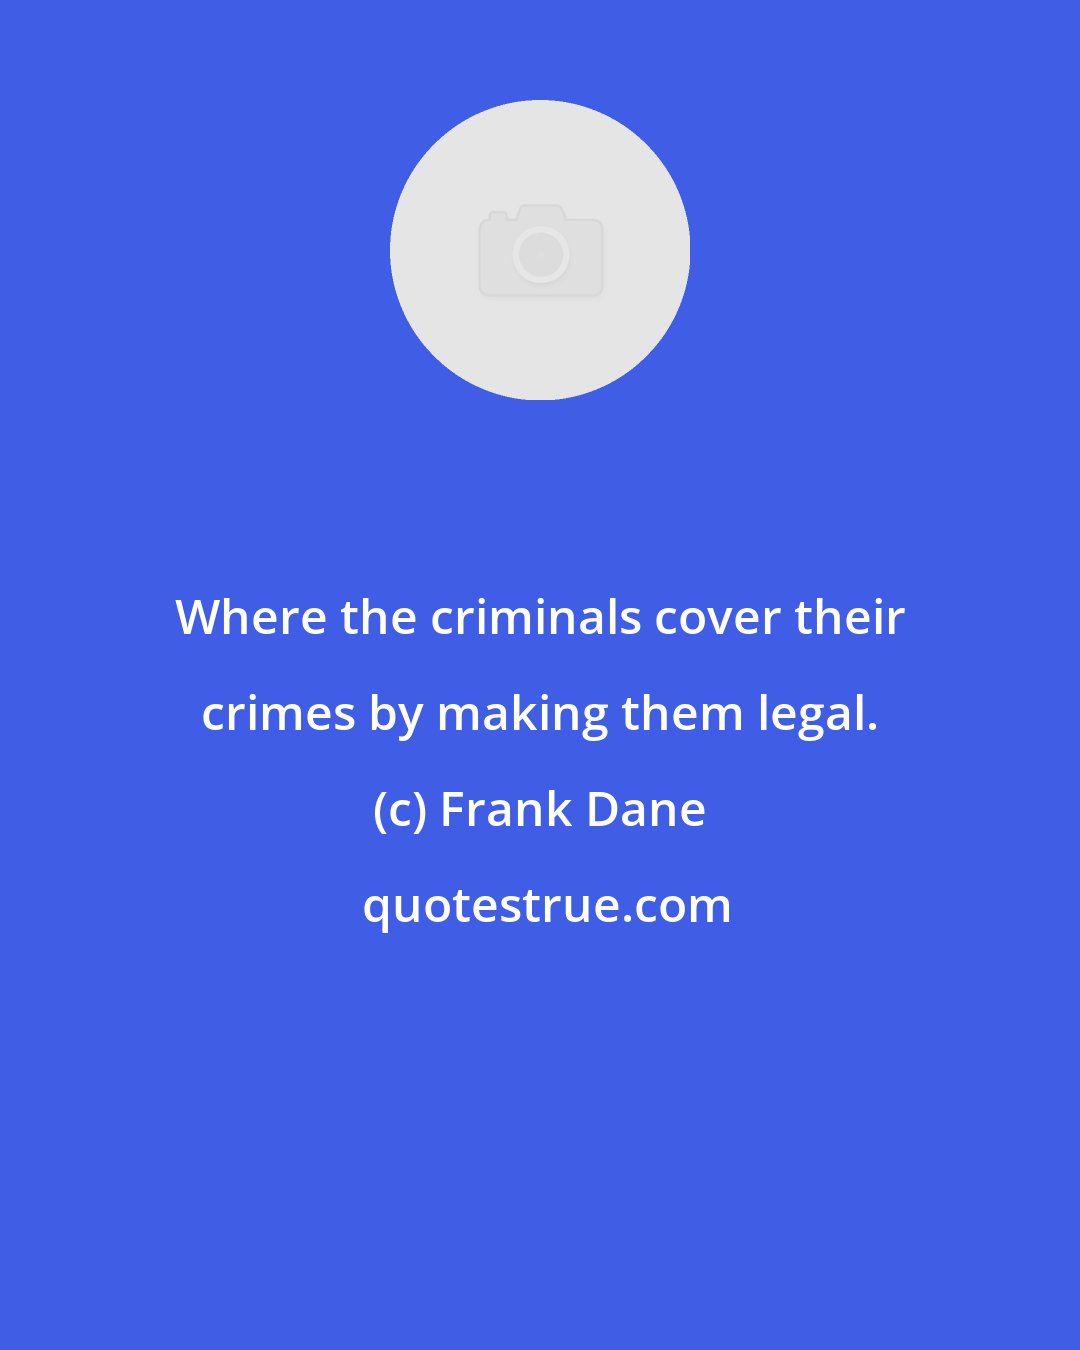 Frank Dane: Where the criminals cover their crimes by making them legal.